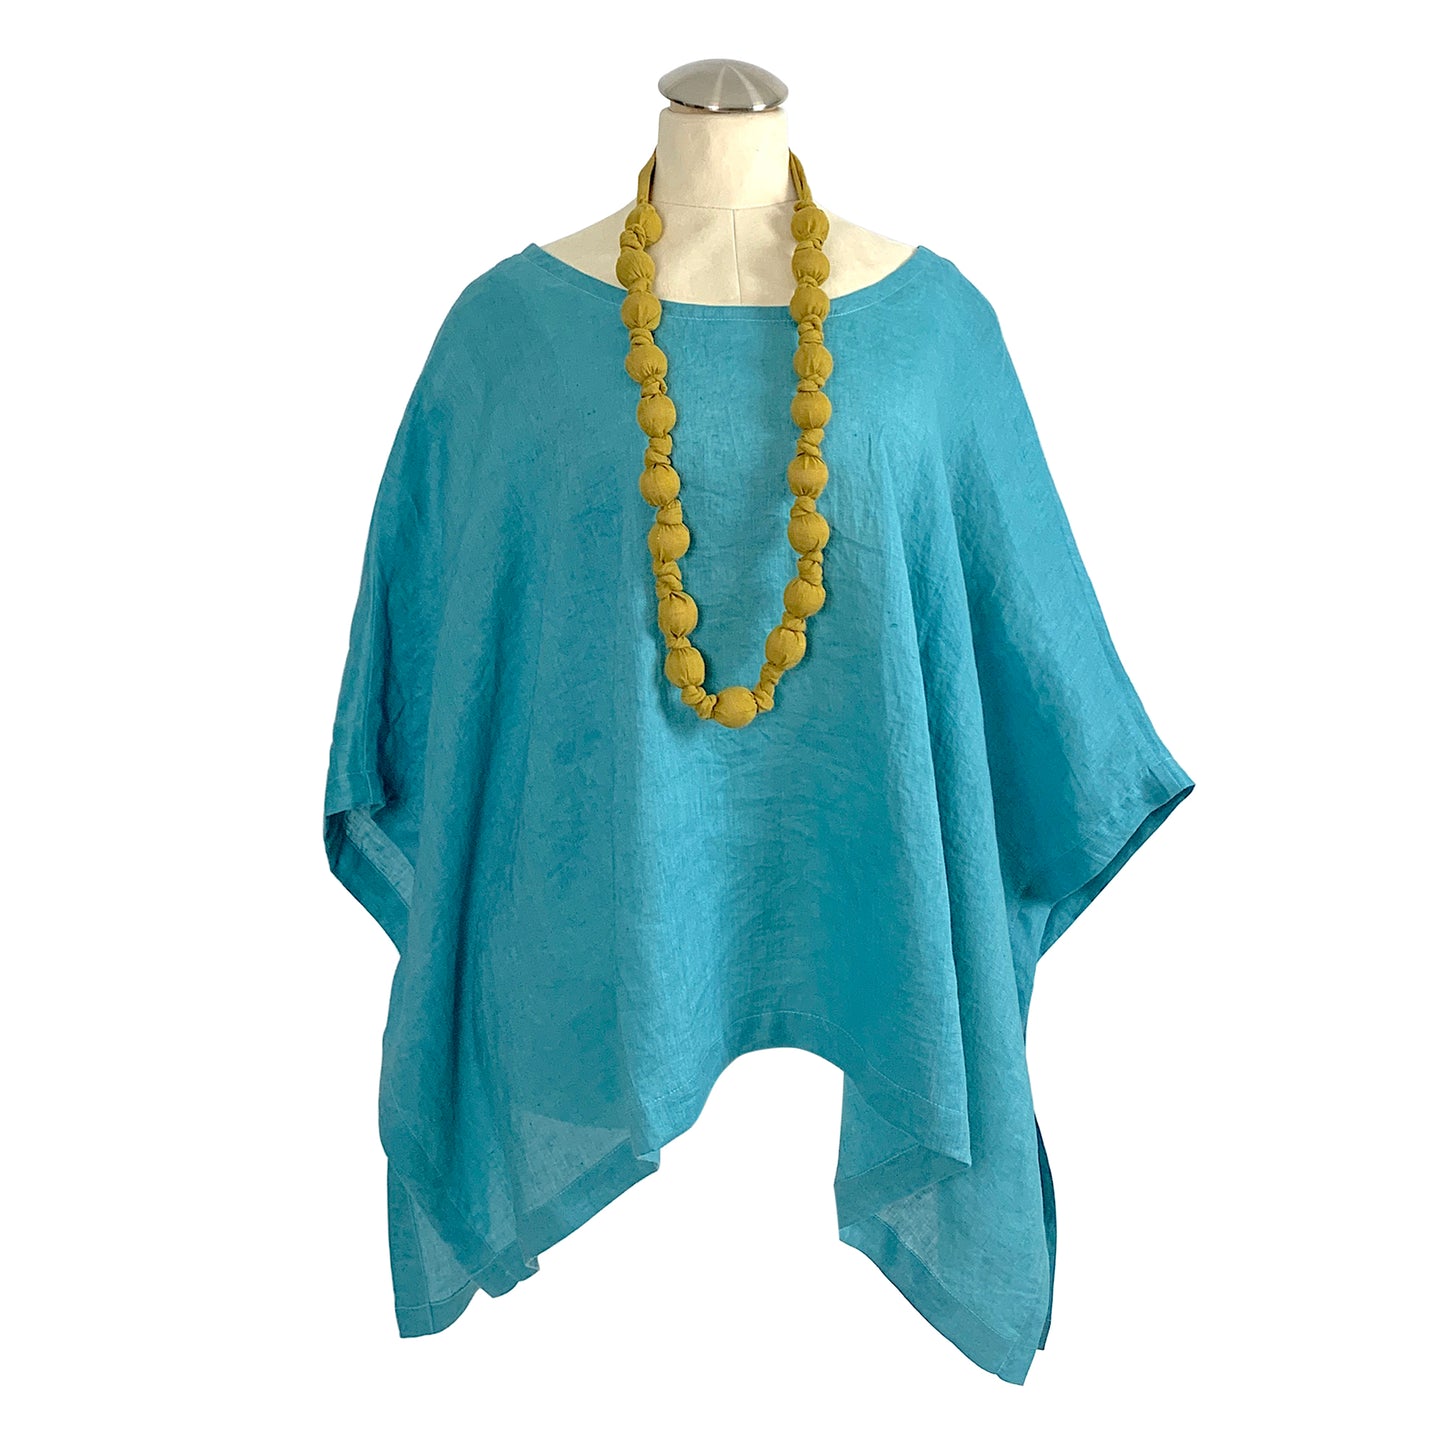 Willow Top: Hand dyed linen in Teal